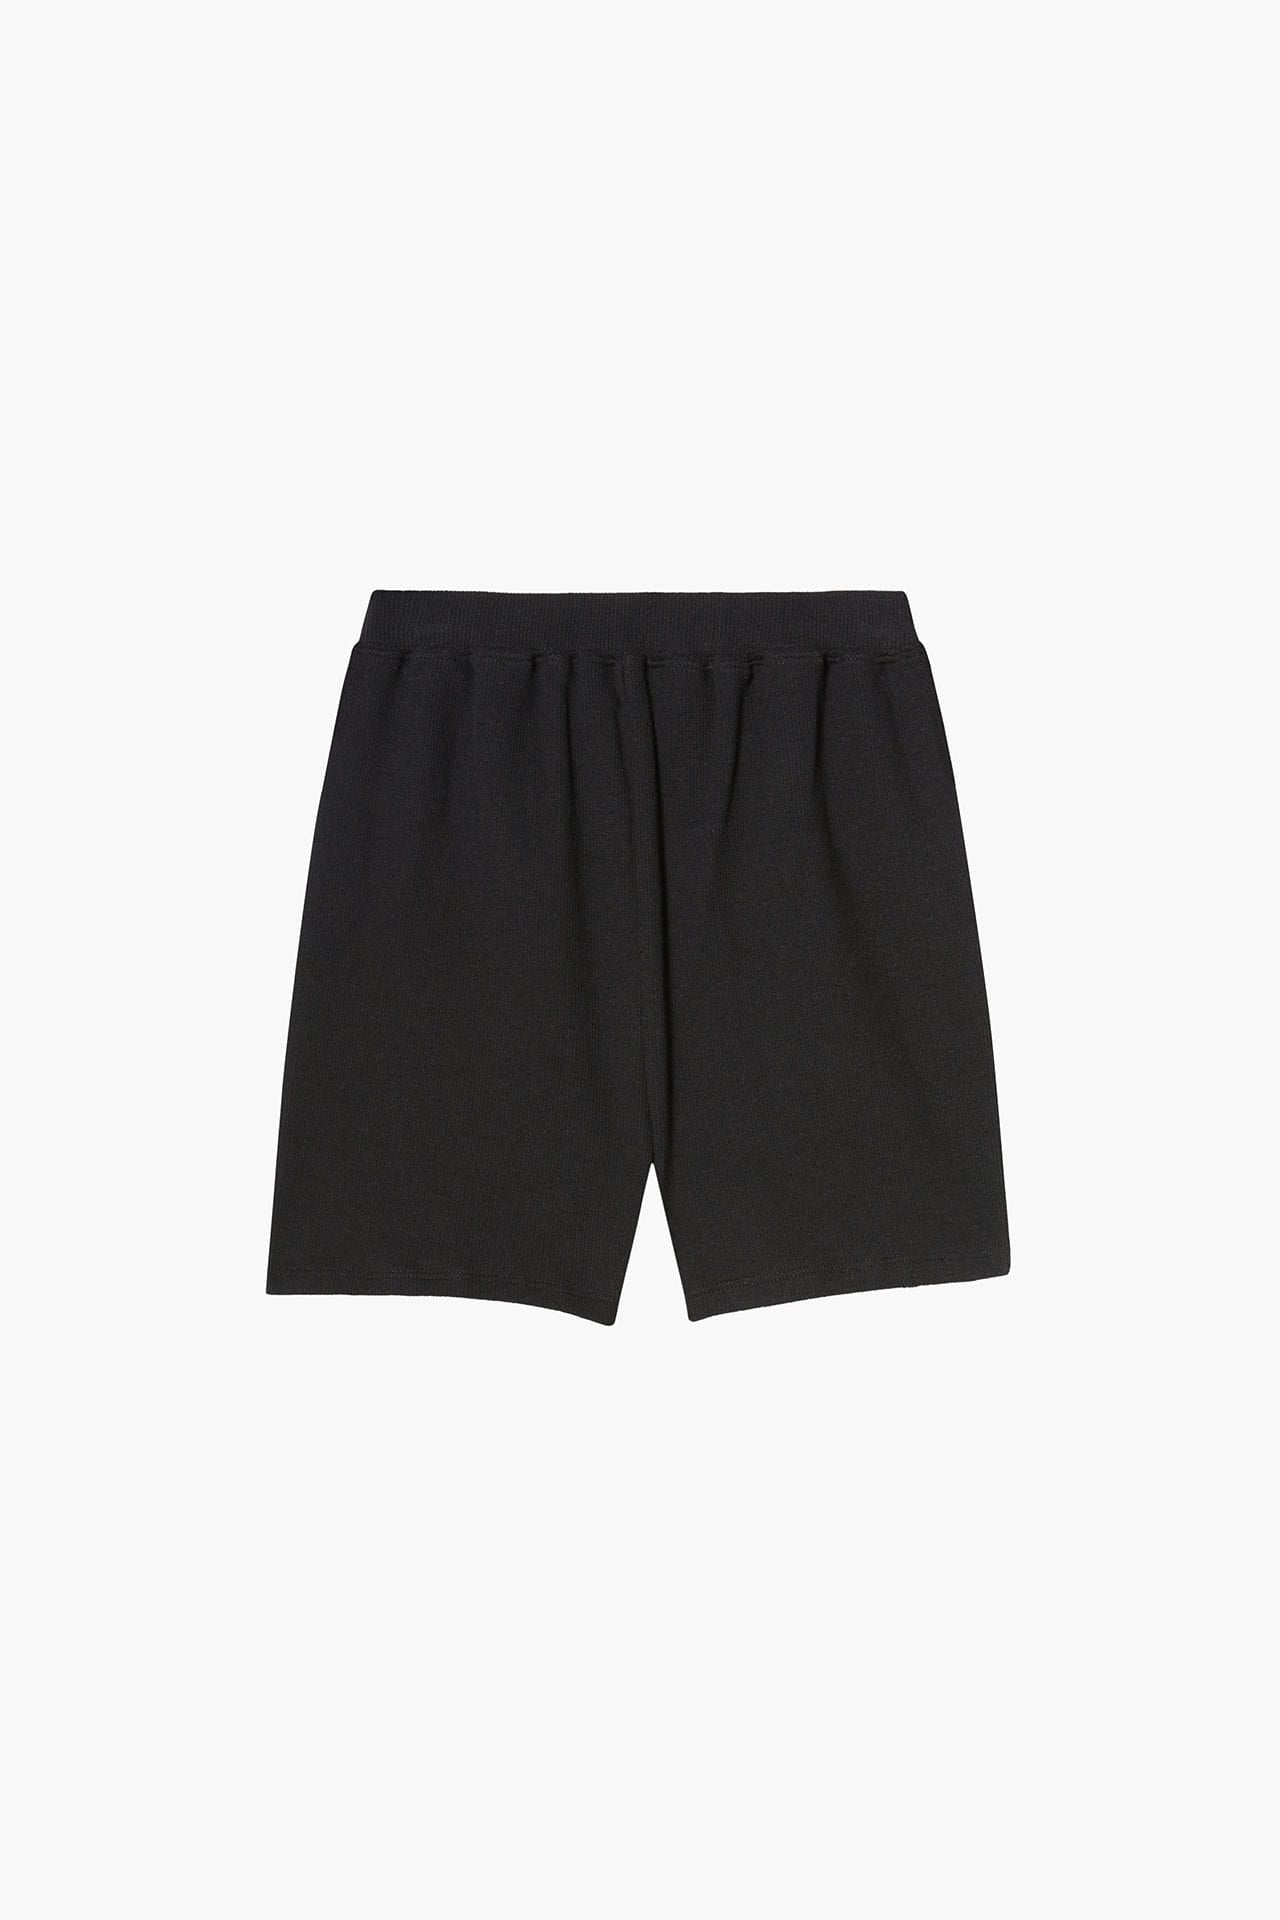 NEO FITTED MICRO SHORTS